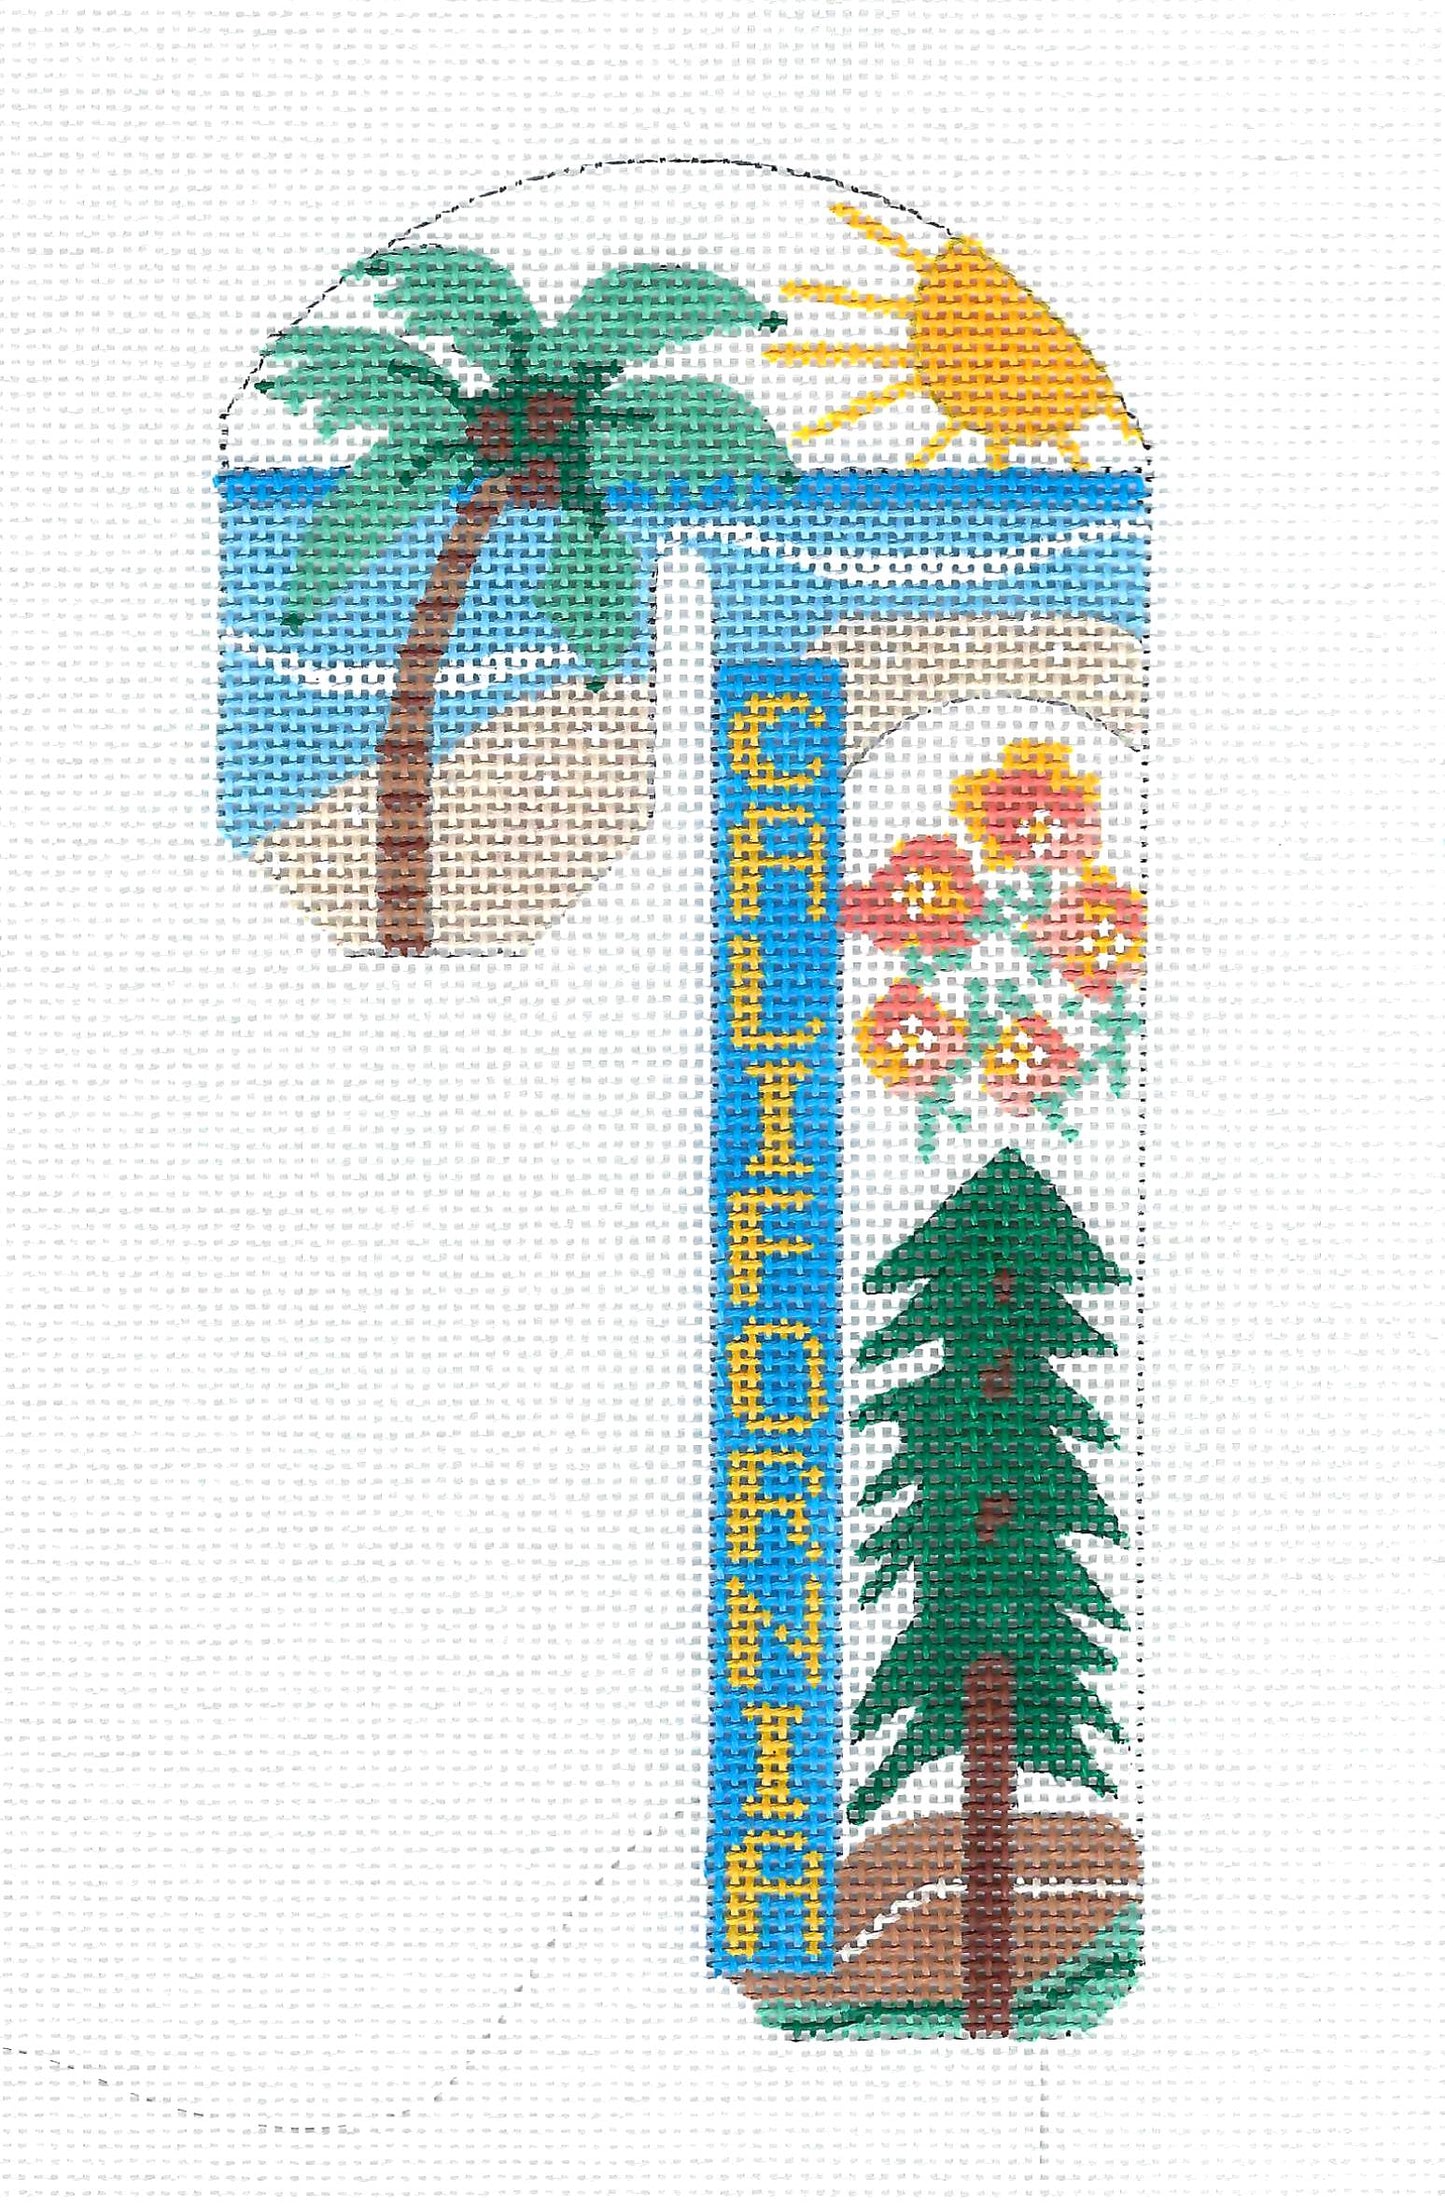 CALIFORNIA  State Destination Lg. Candy Cane handpainted Needlepoint Canvas by CH Design from Danji